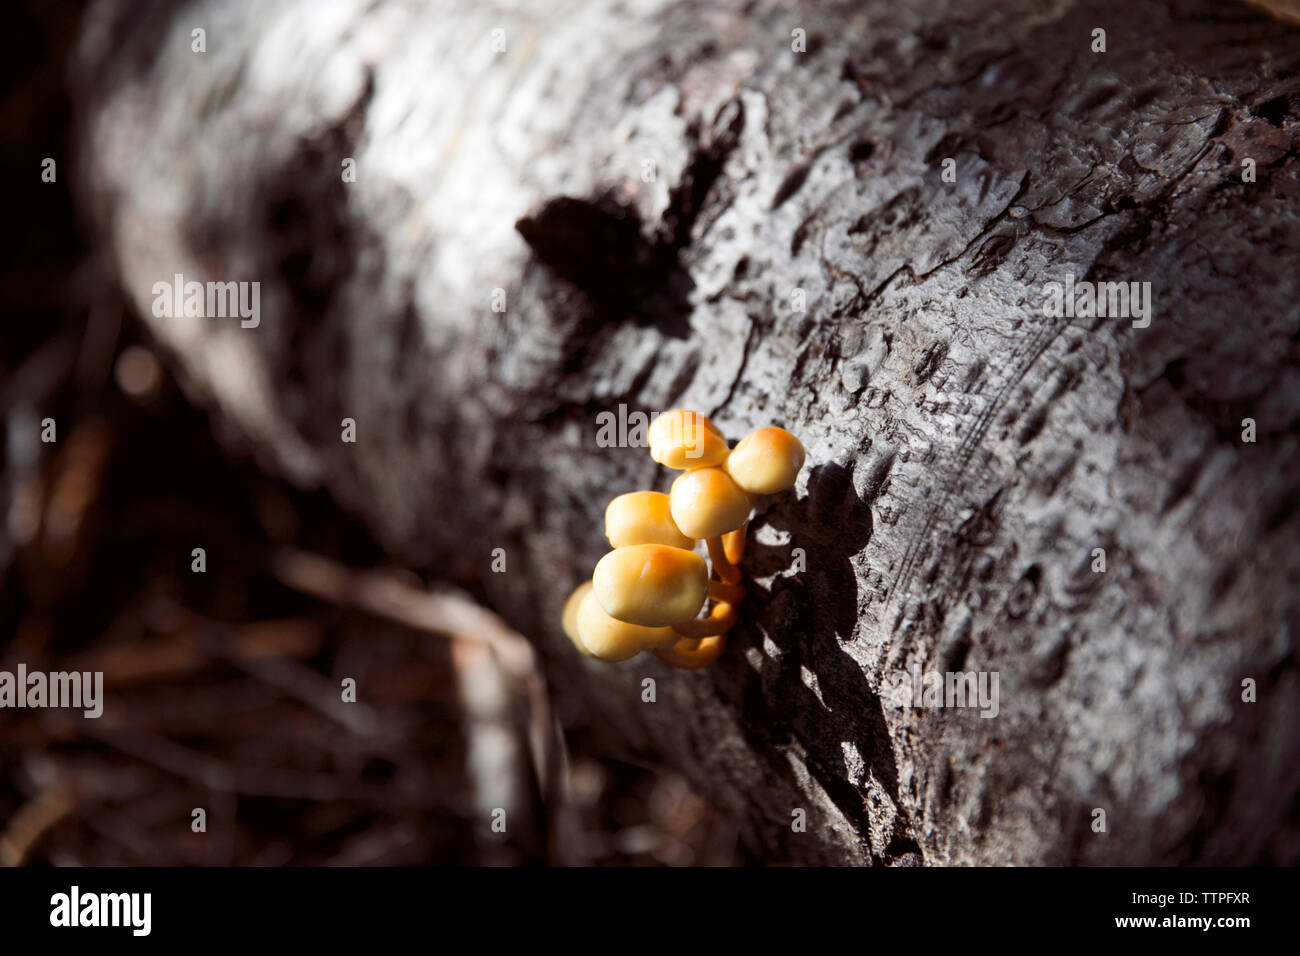 Close-up of fungus growing on tree in forest Stock Photo